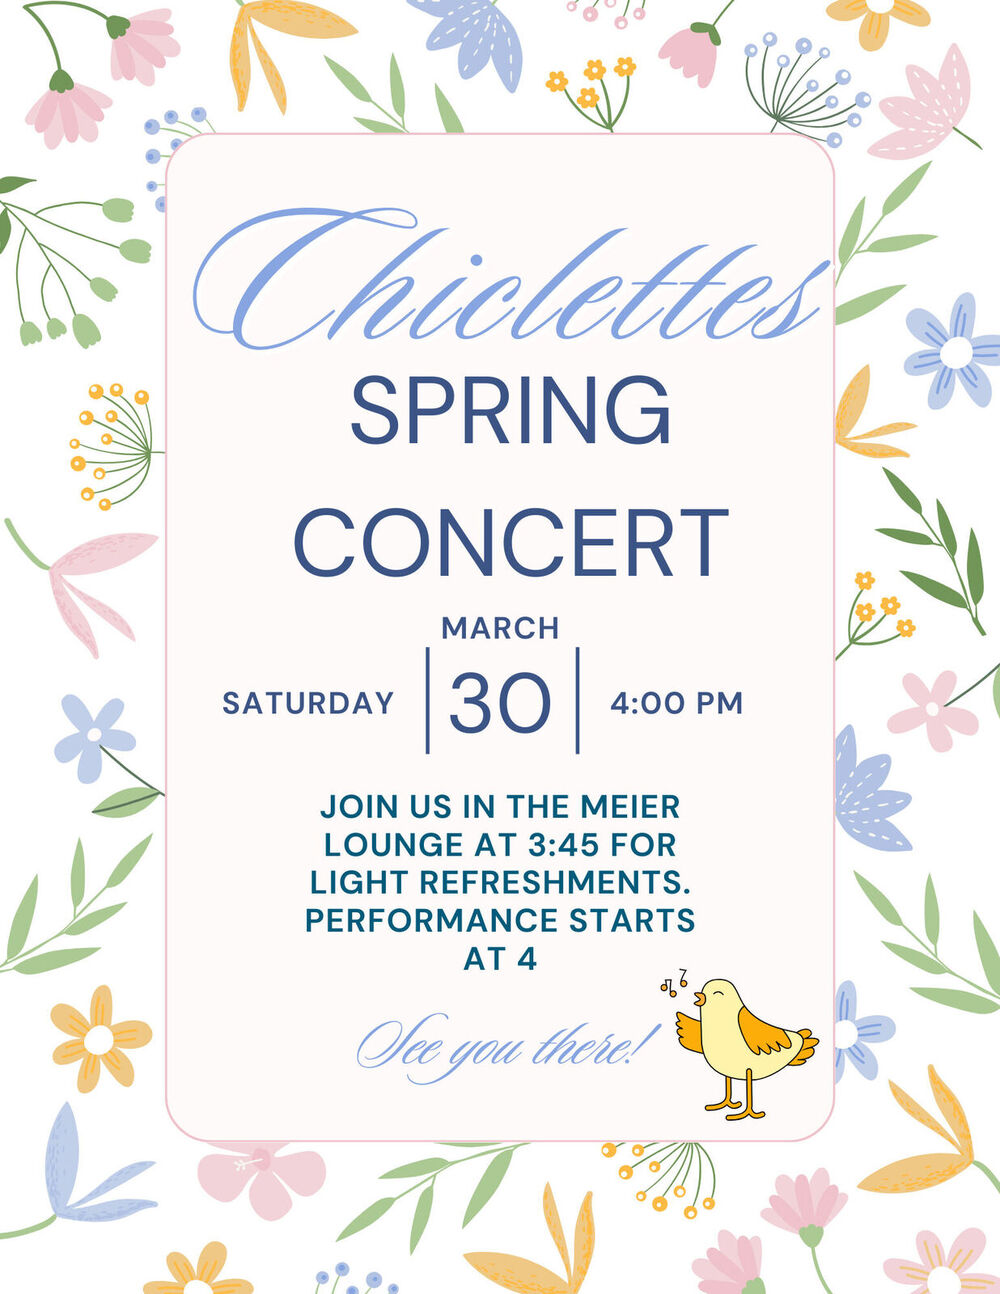 chiclettes-spring-concert